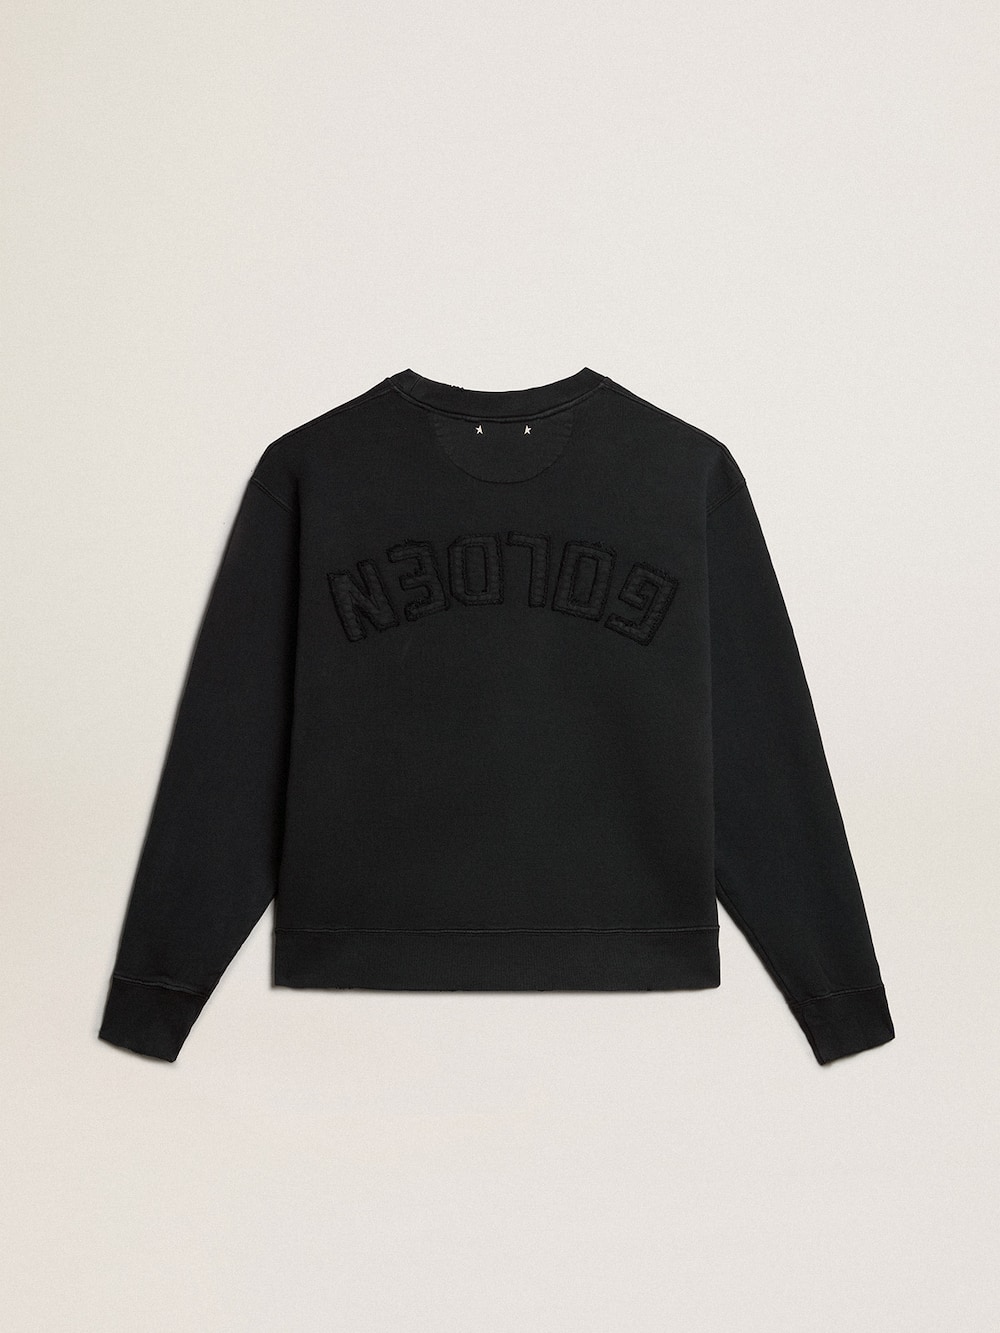 Golden Goose - Sweatshirt in washed black with reverse logo on the back - Asian fit in 